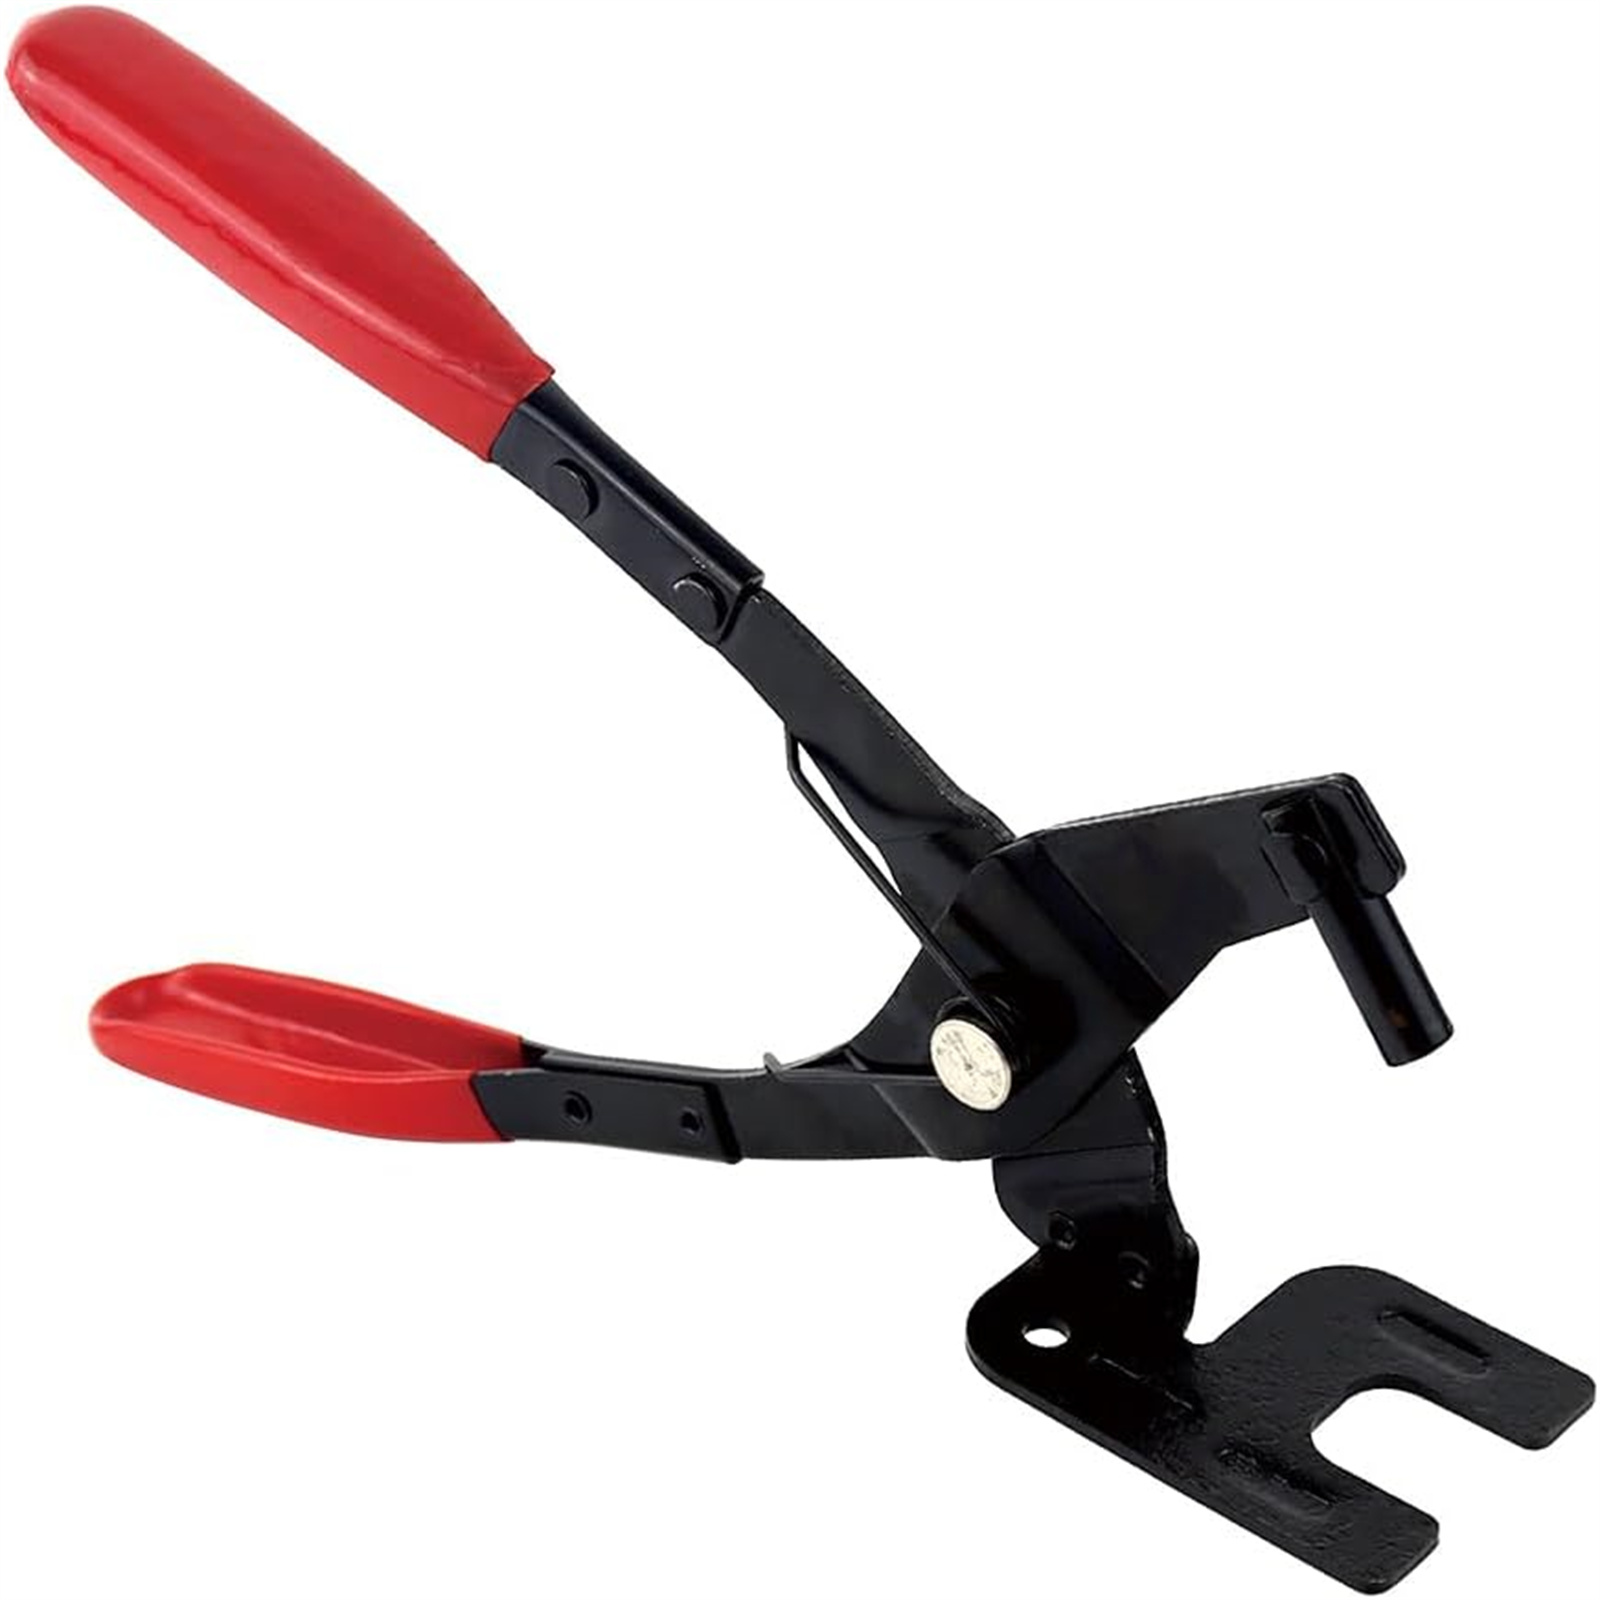 Exhaust Hanger Removal Pliers Exhaust Hanger Rubber Pad Separation Disassembly Tools For All Exhaust Rubber Hangers